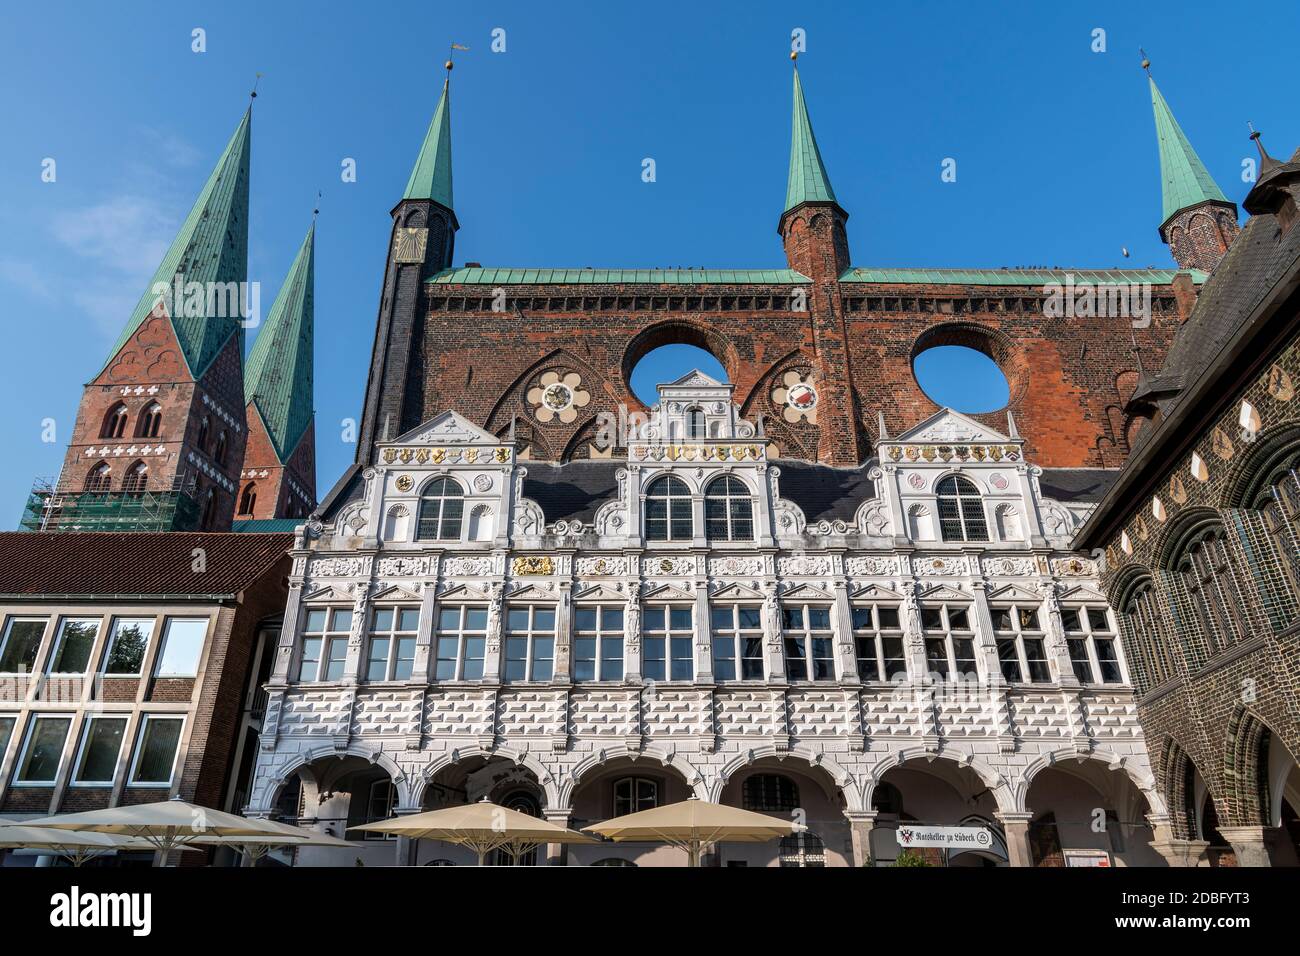 Stadtverwaltung Hansestadt Lübeck. This 1226 town hall has ornate arched buildings, in styles from Gothic to Renaissance - plus wind holes too! Stock Photo